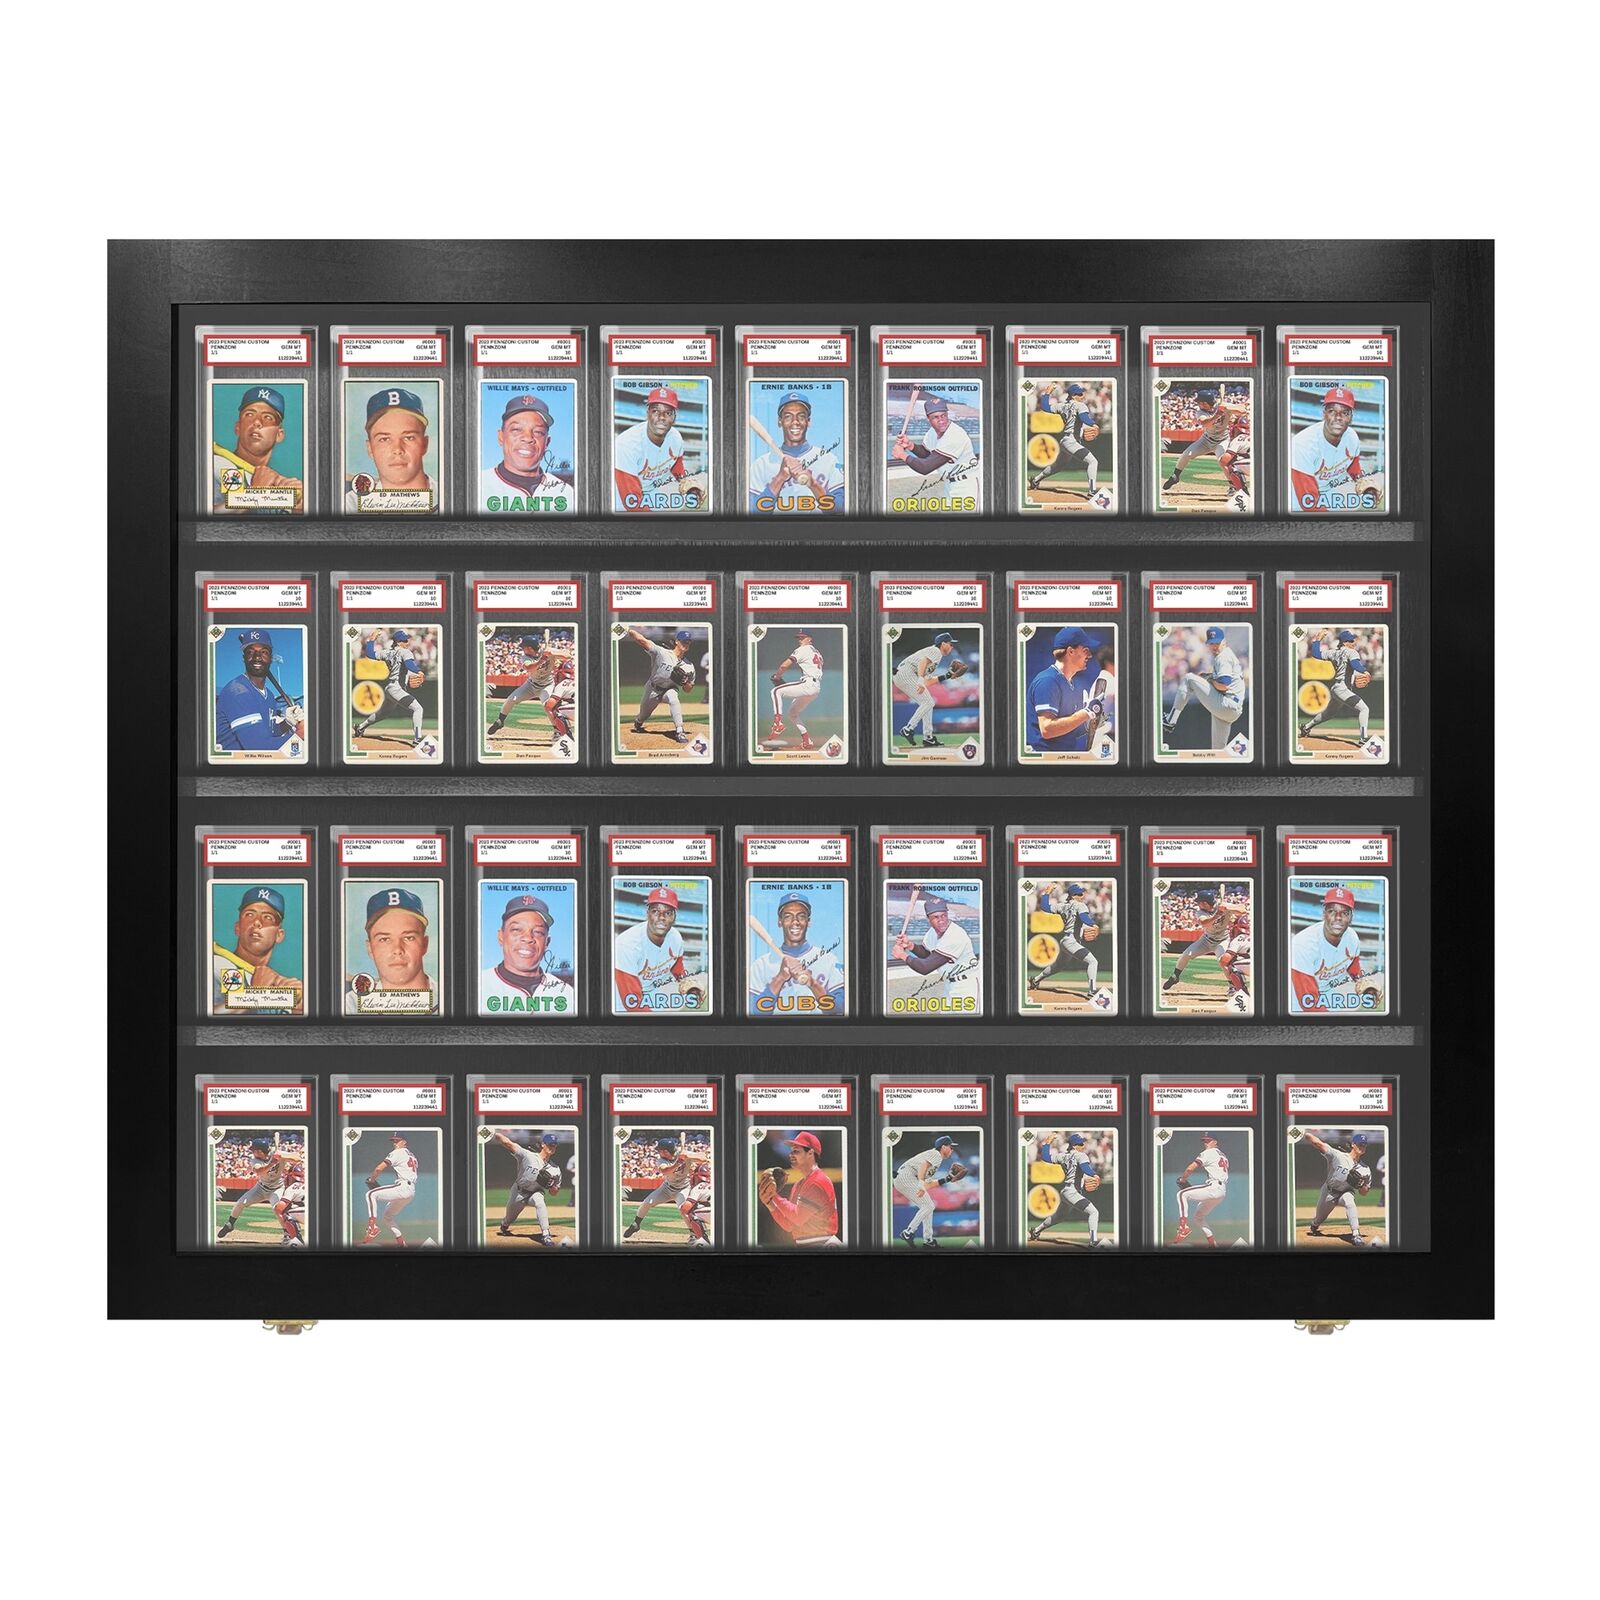 PENNZONI Sports Card Display Case, Holds 36 PSA Graded Sports & Playing Cards